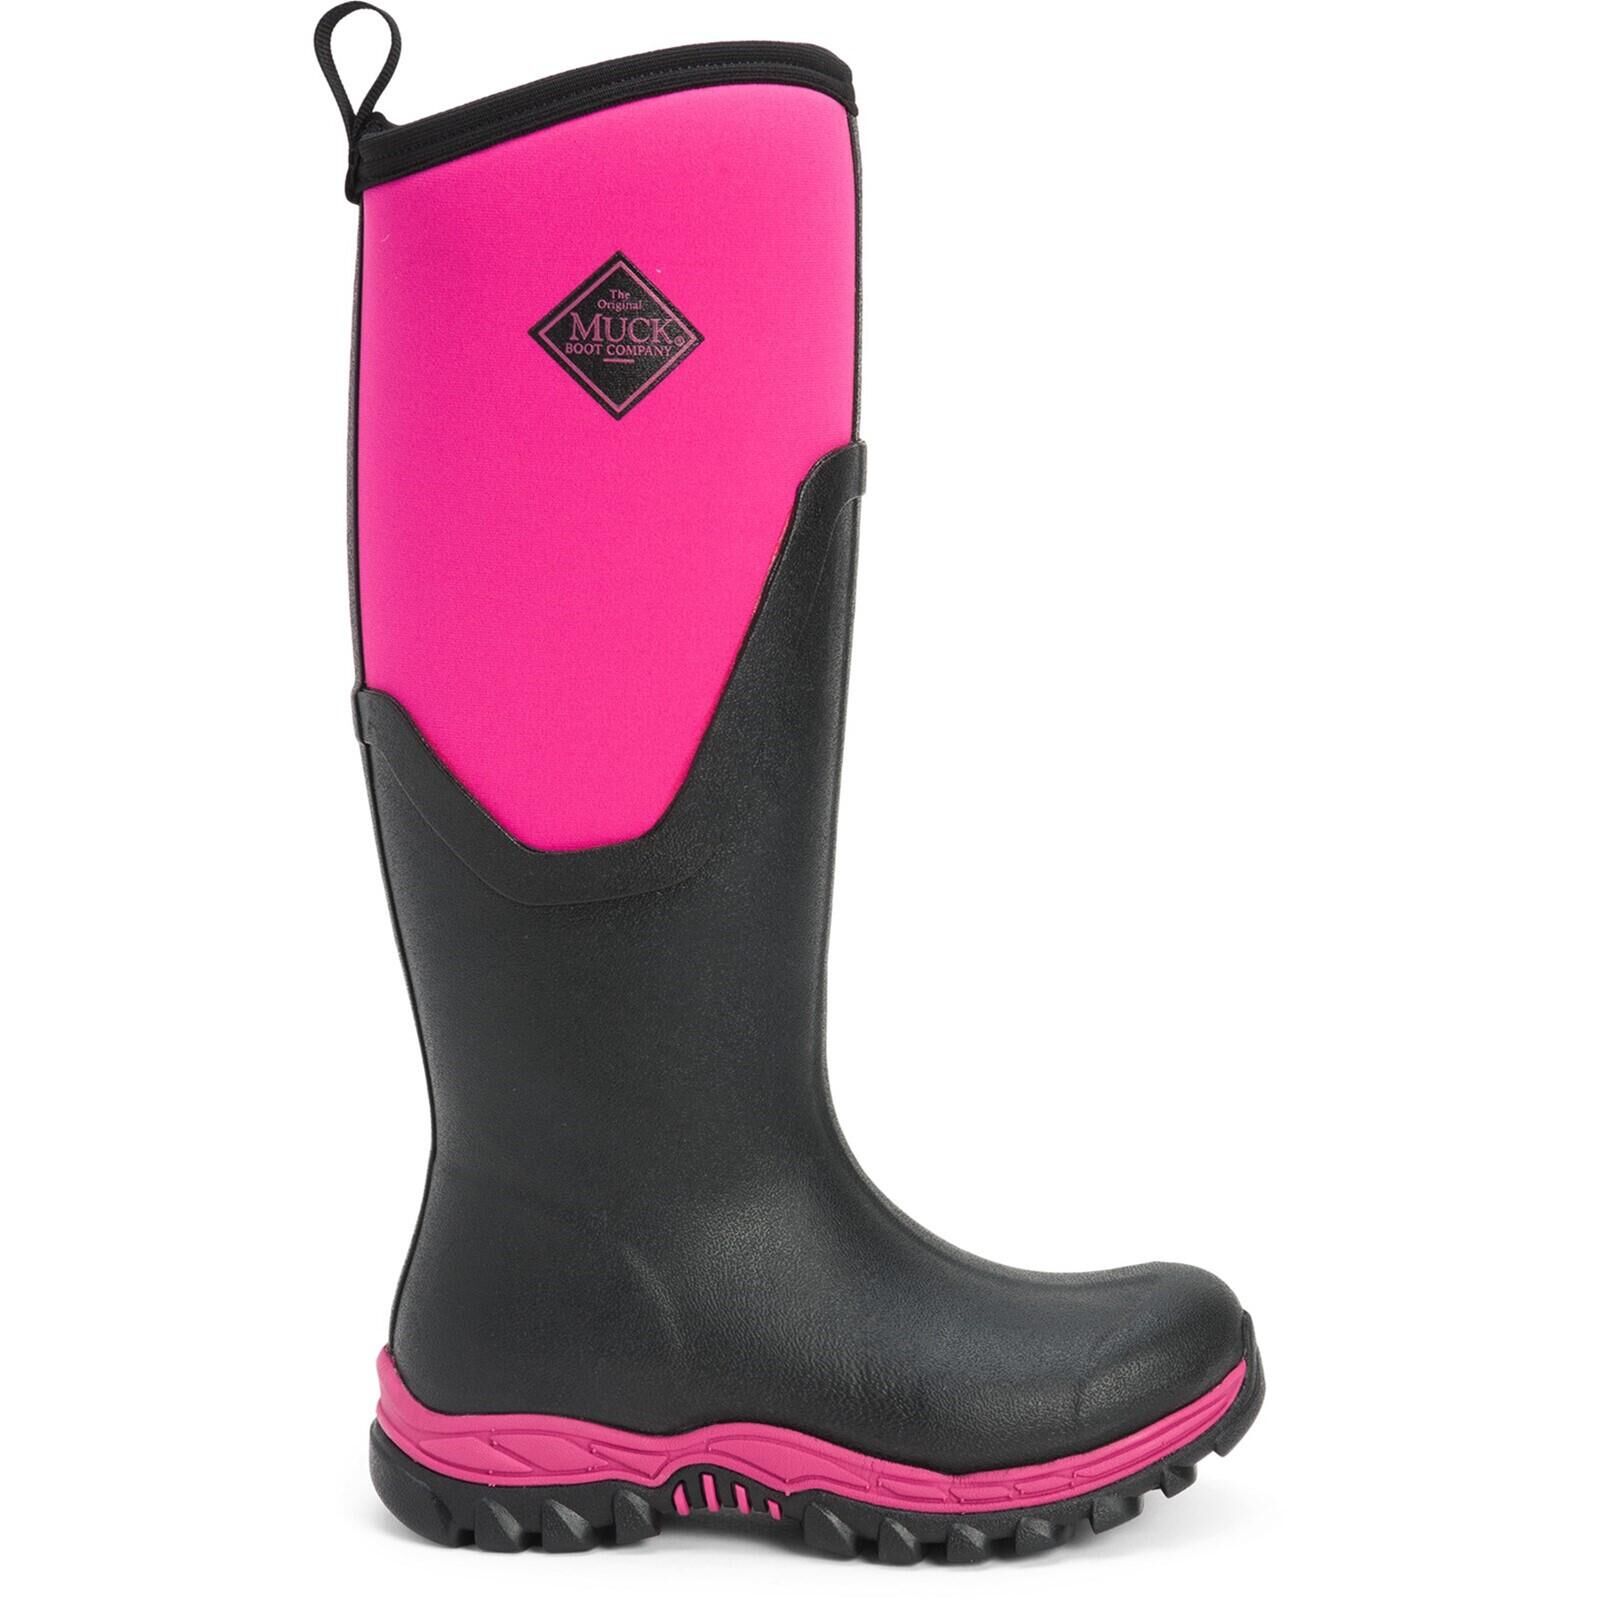 MUCK BOOTS Arctic Sport II Tall Textile/Weather Wellingtons BLACK